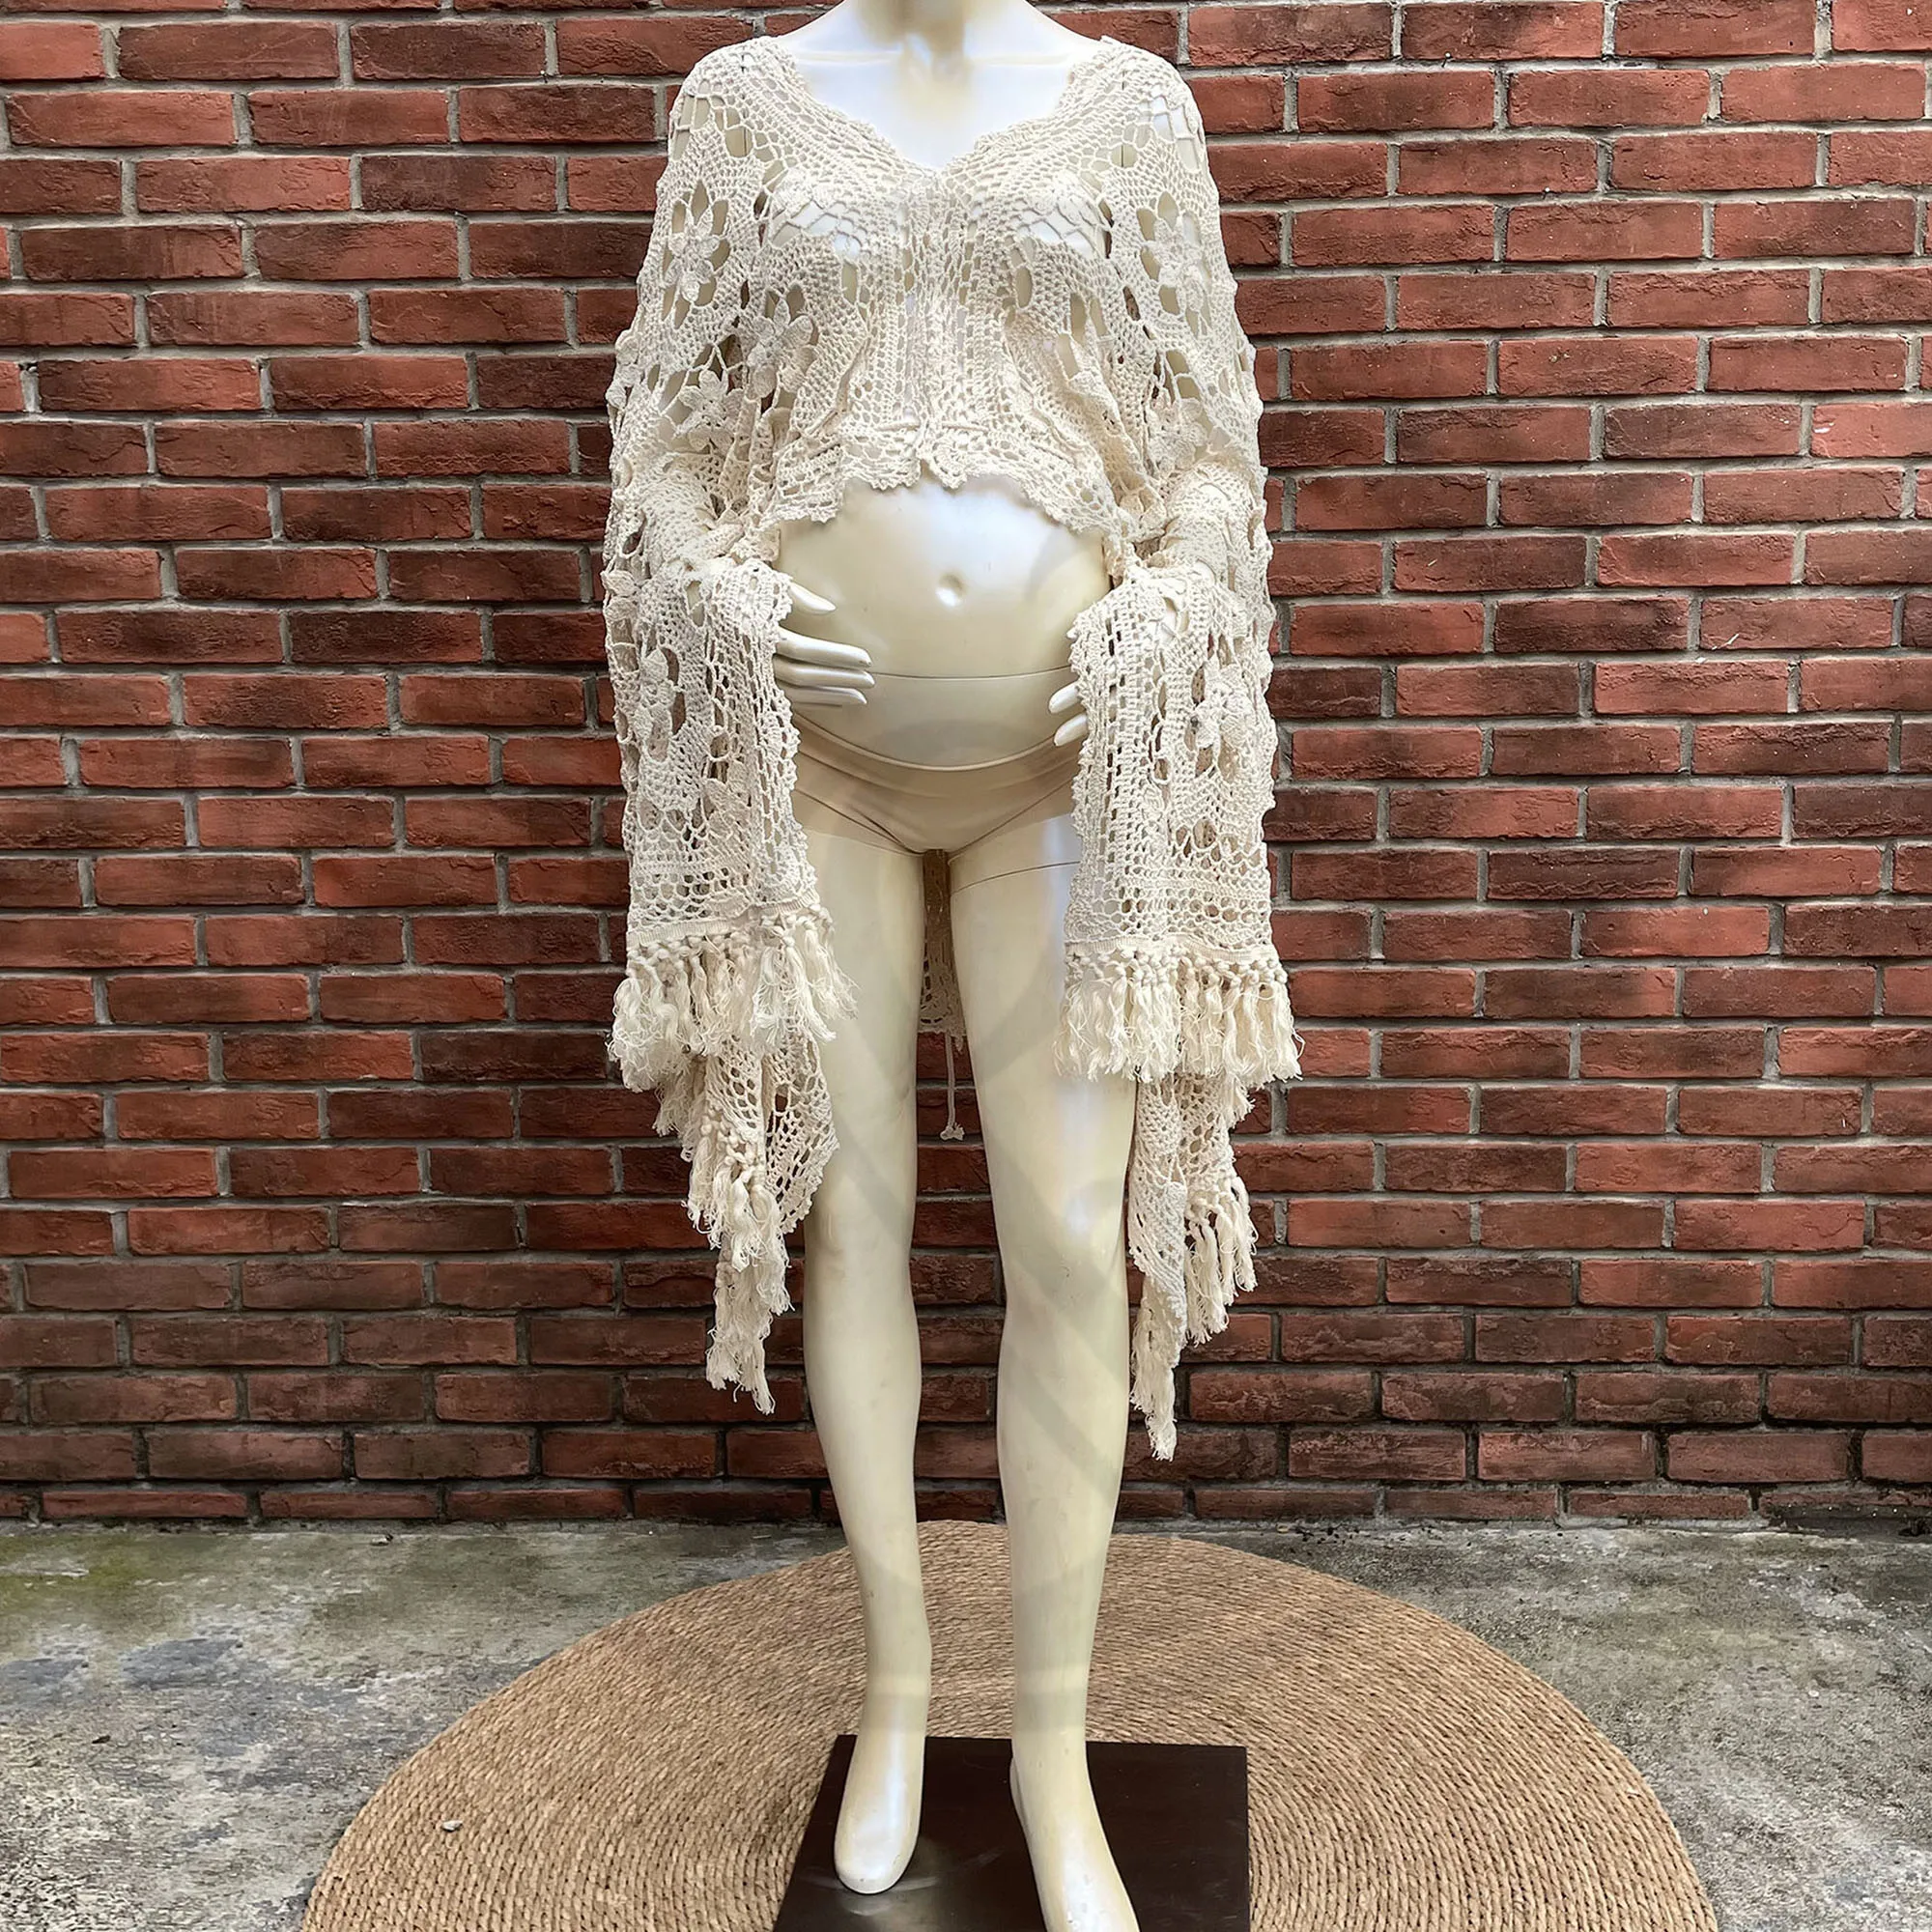 Photo Shoot Extra Long Floral Pregnant Handcraft Crochet Shawl with Tassel Handmade Cotton Beige Cape for Women Photography Prop enlarge